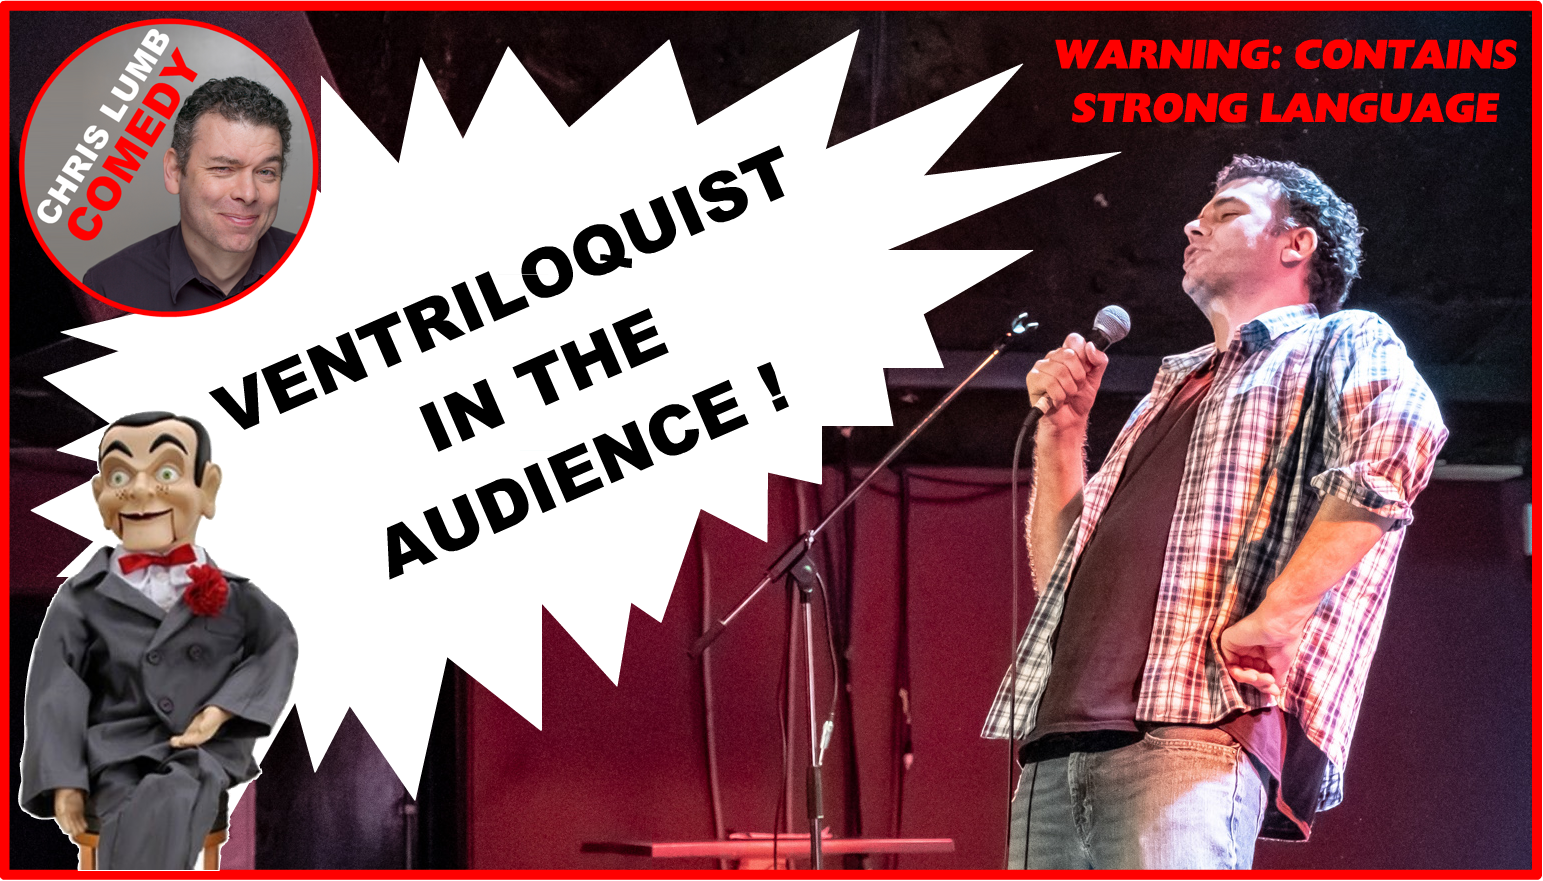 Chris Lumb Comedy "Ventriloquist in the Audience"